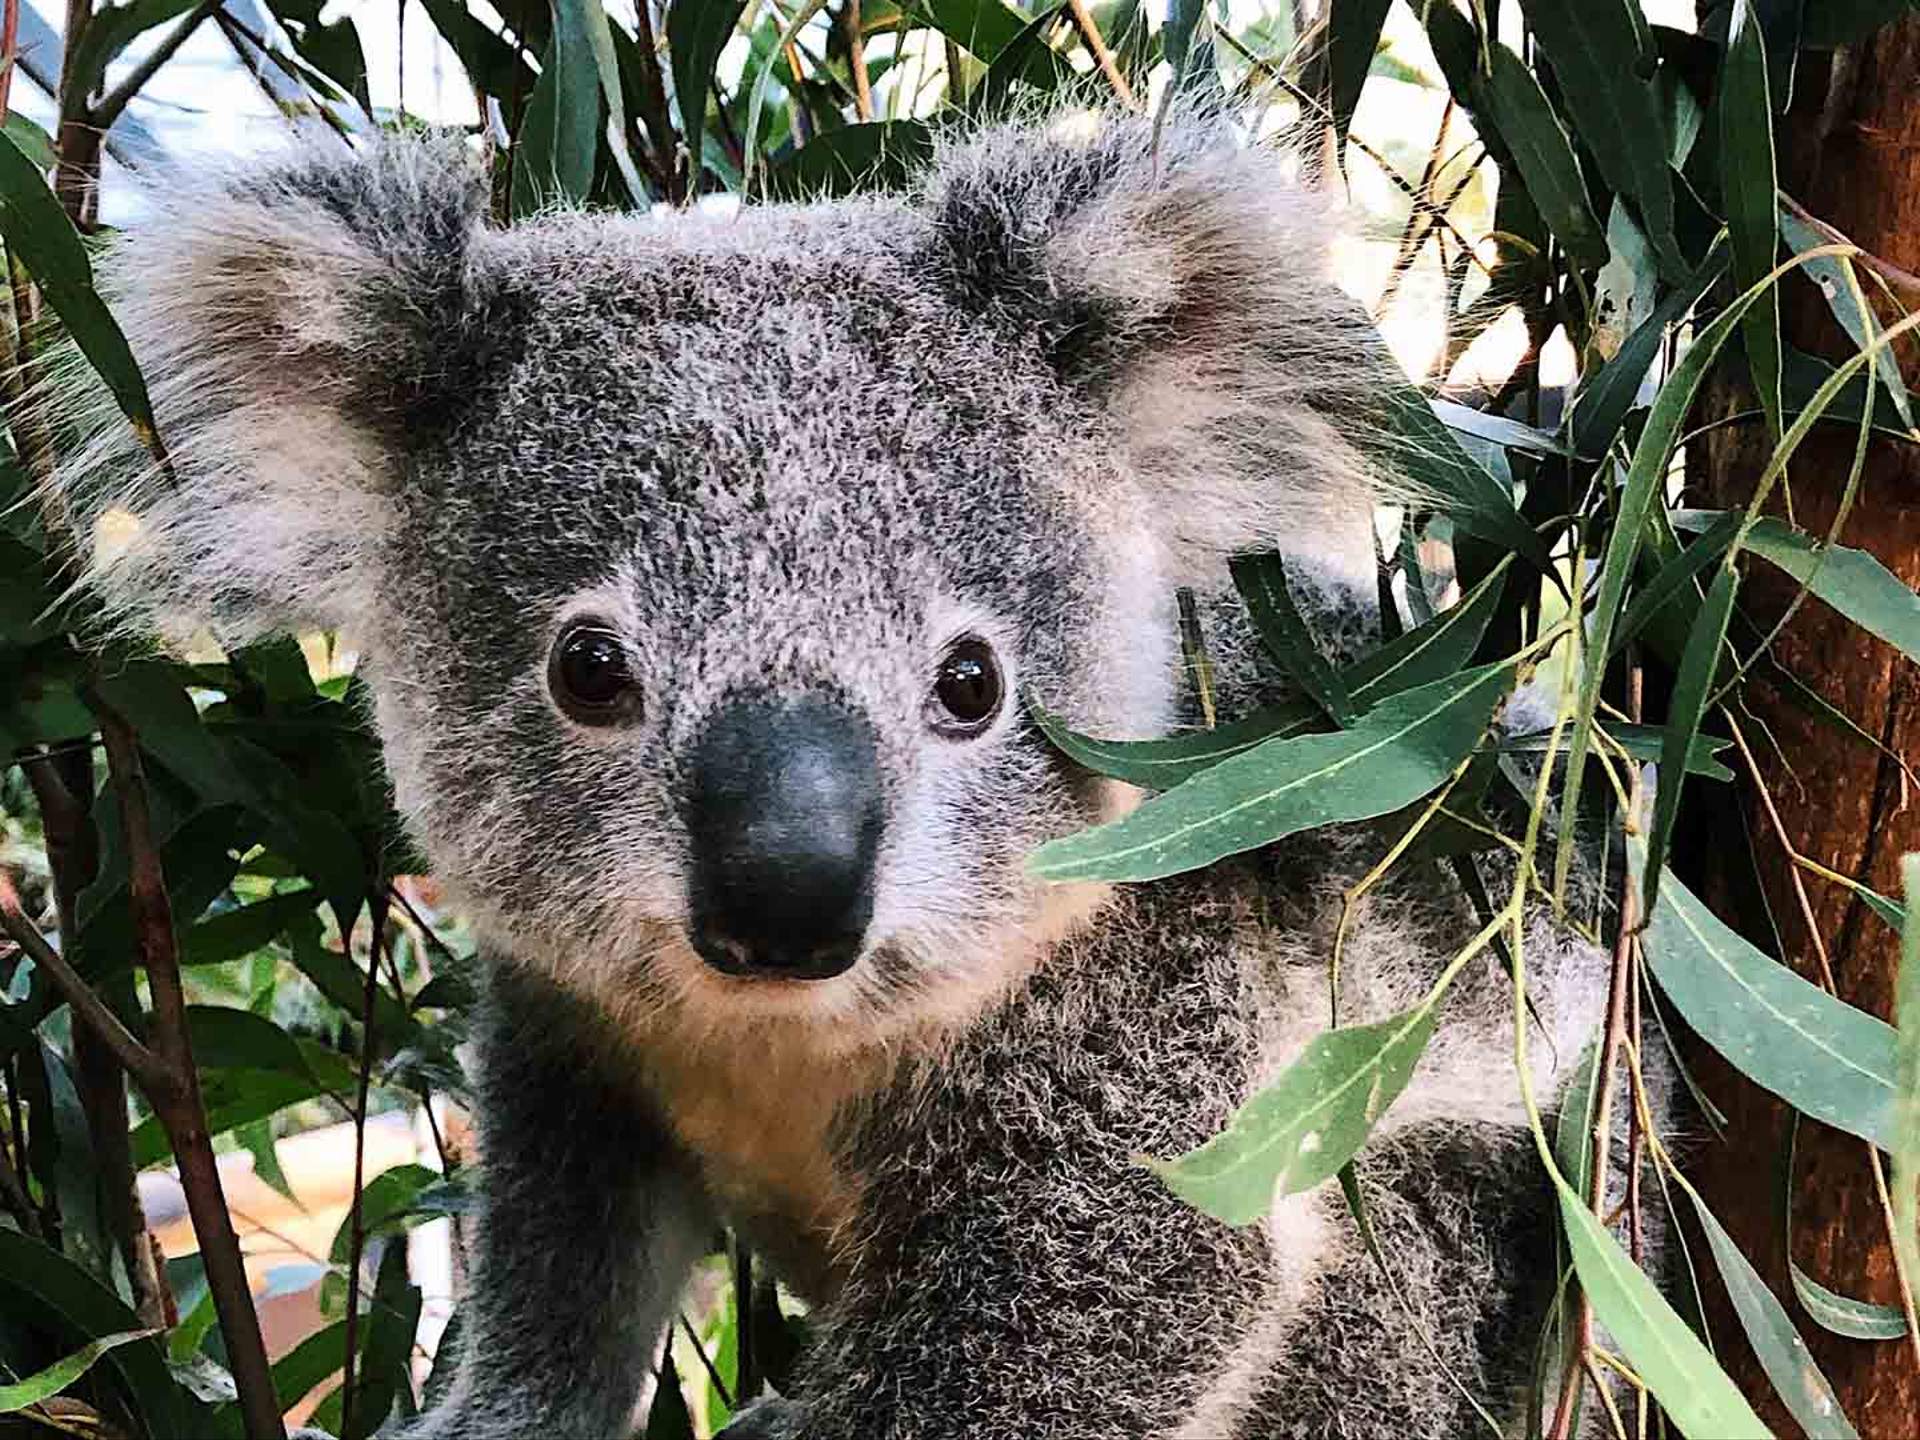 Taronga Zoo Has Released Footage of Its Adorable Koala Joey If Your Day  Could Use Some Cuteness - Concrete Playground